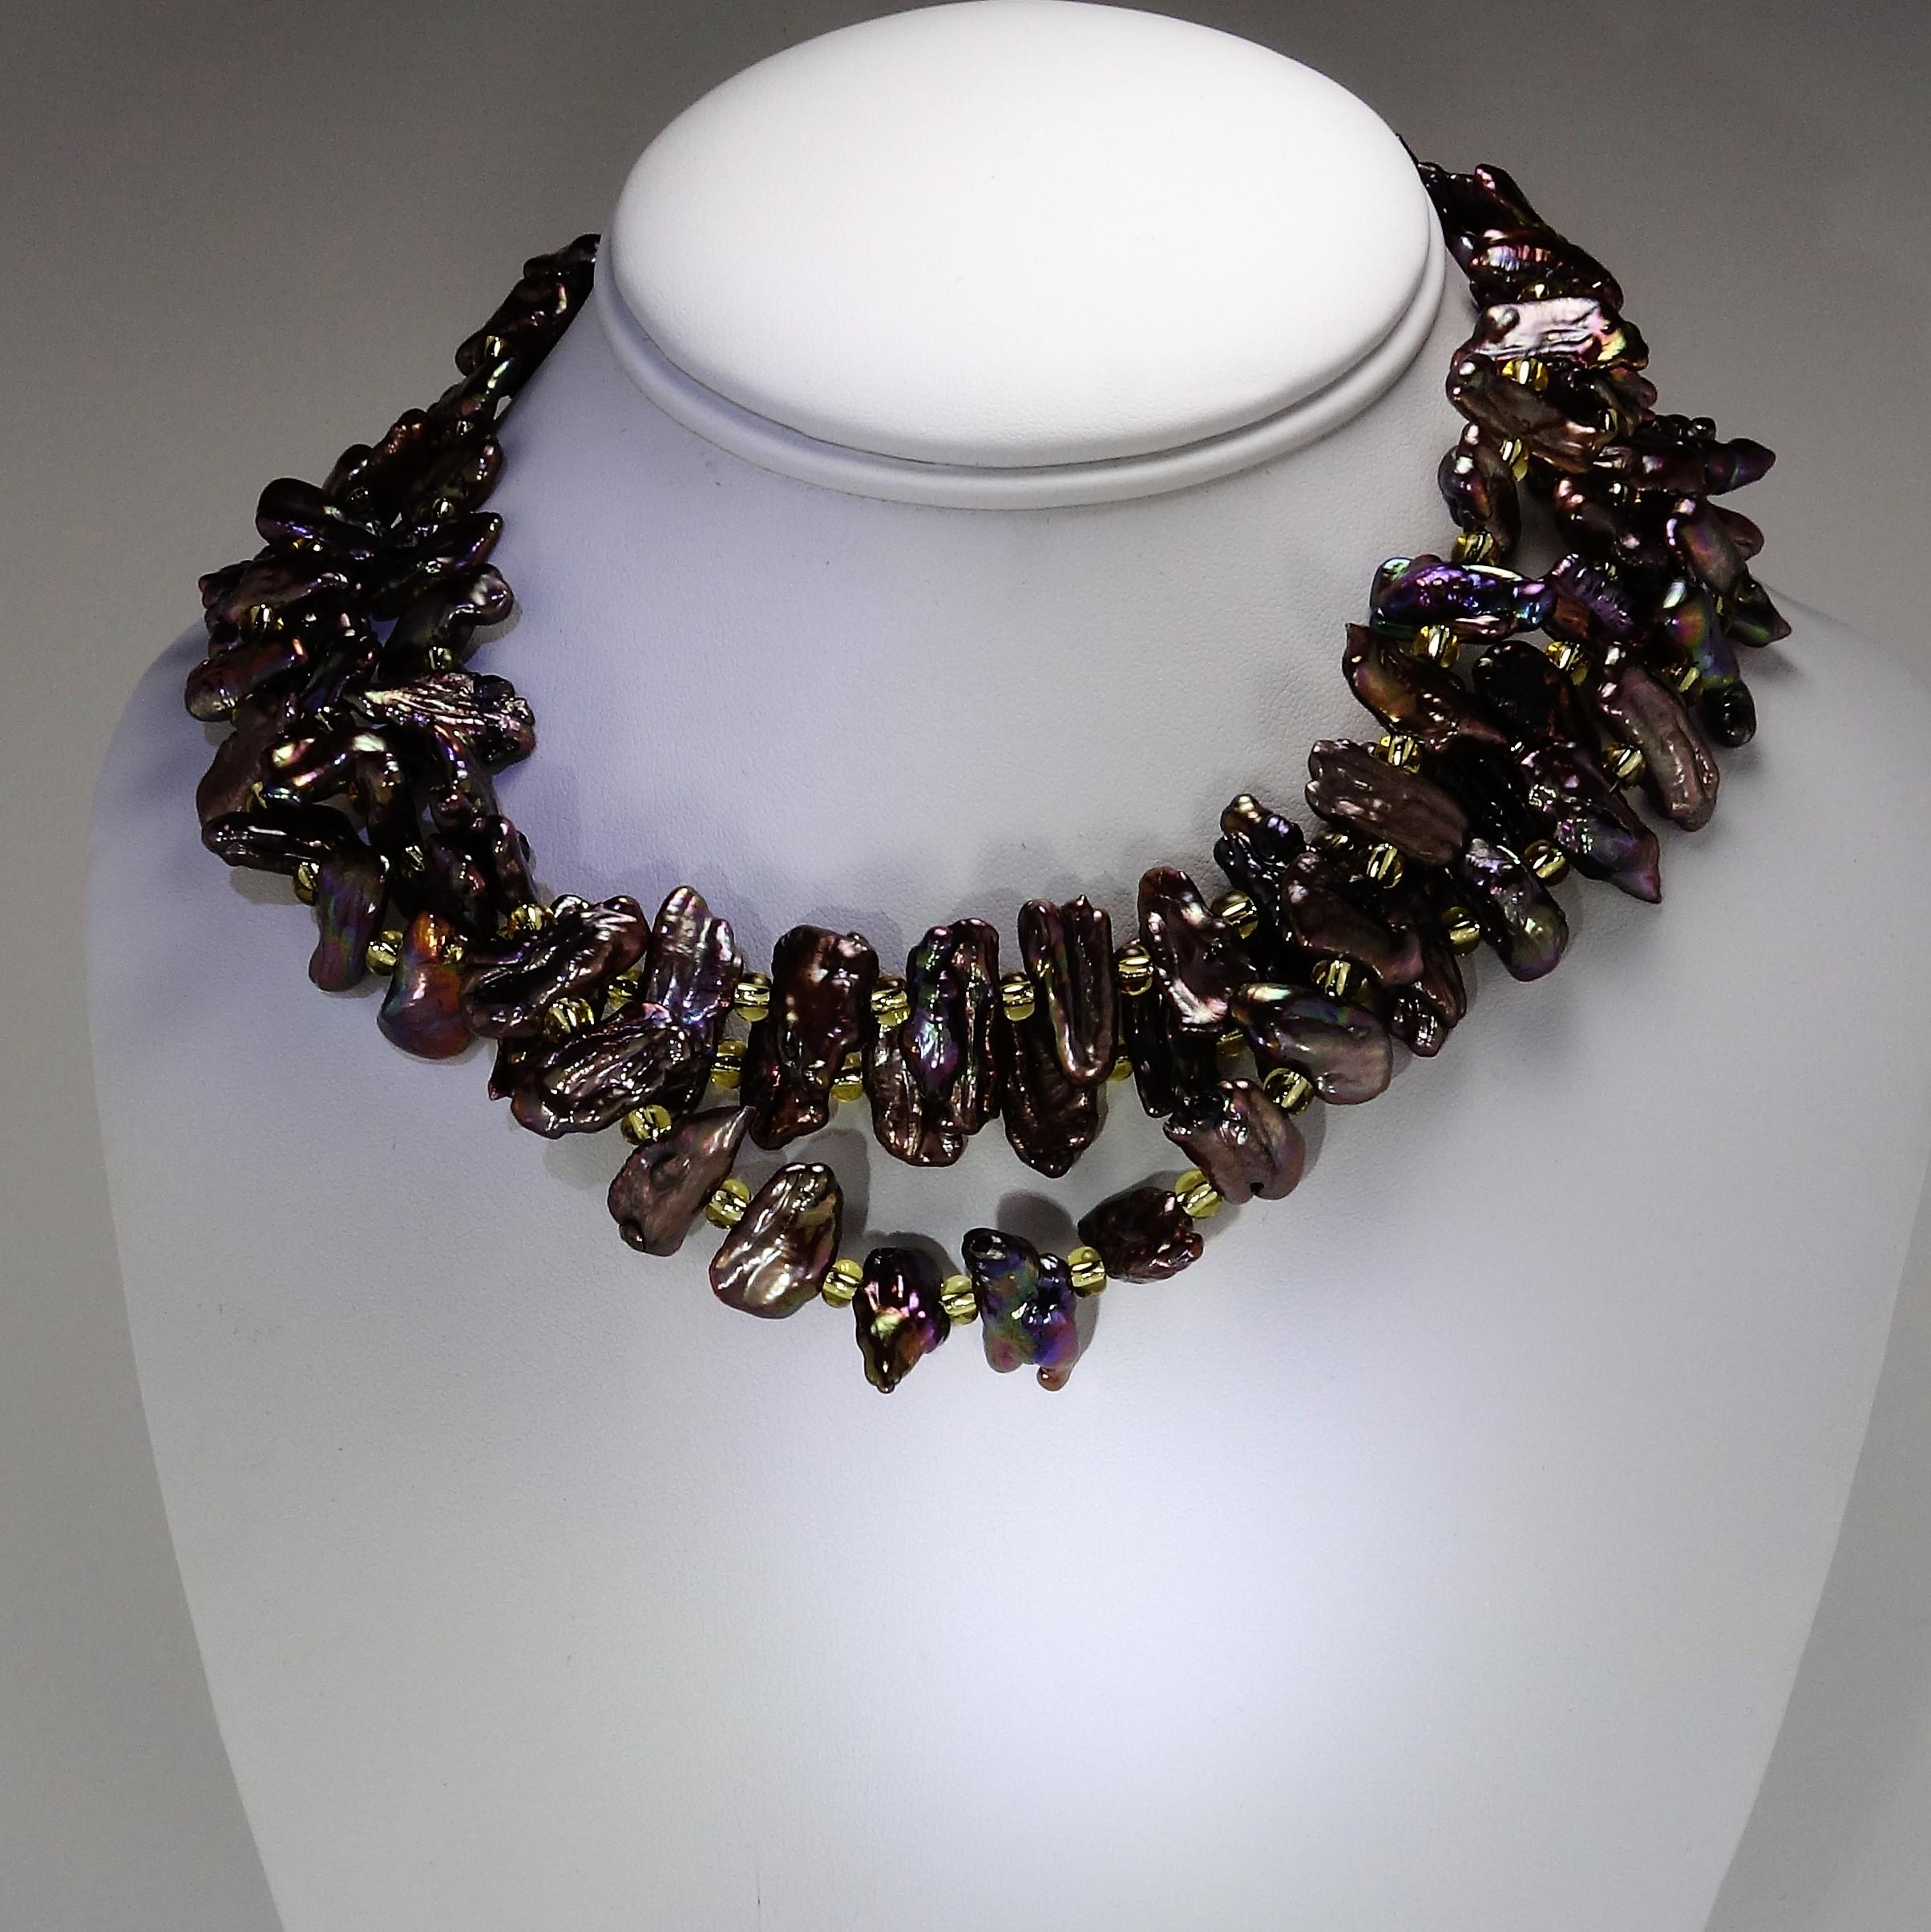 'Put on your Pearls Girls' Lulu Guinness

One of a kind necklace of Mauve Iridescent long pearls (17 x 8 MM) accented with gold Czech beads and gold tone toggle clasp. This is a fantastic choker necklace at 17 inches in length, you can wear it with